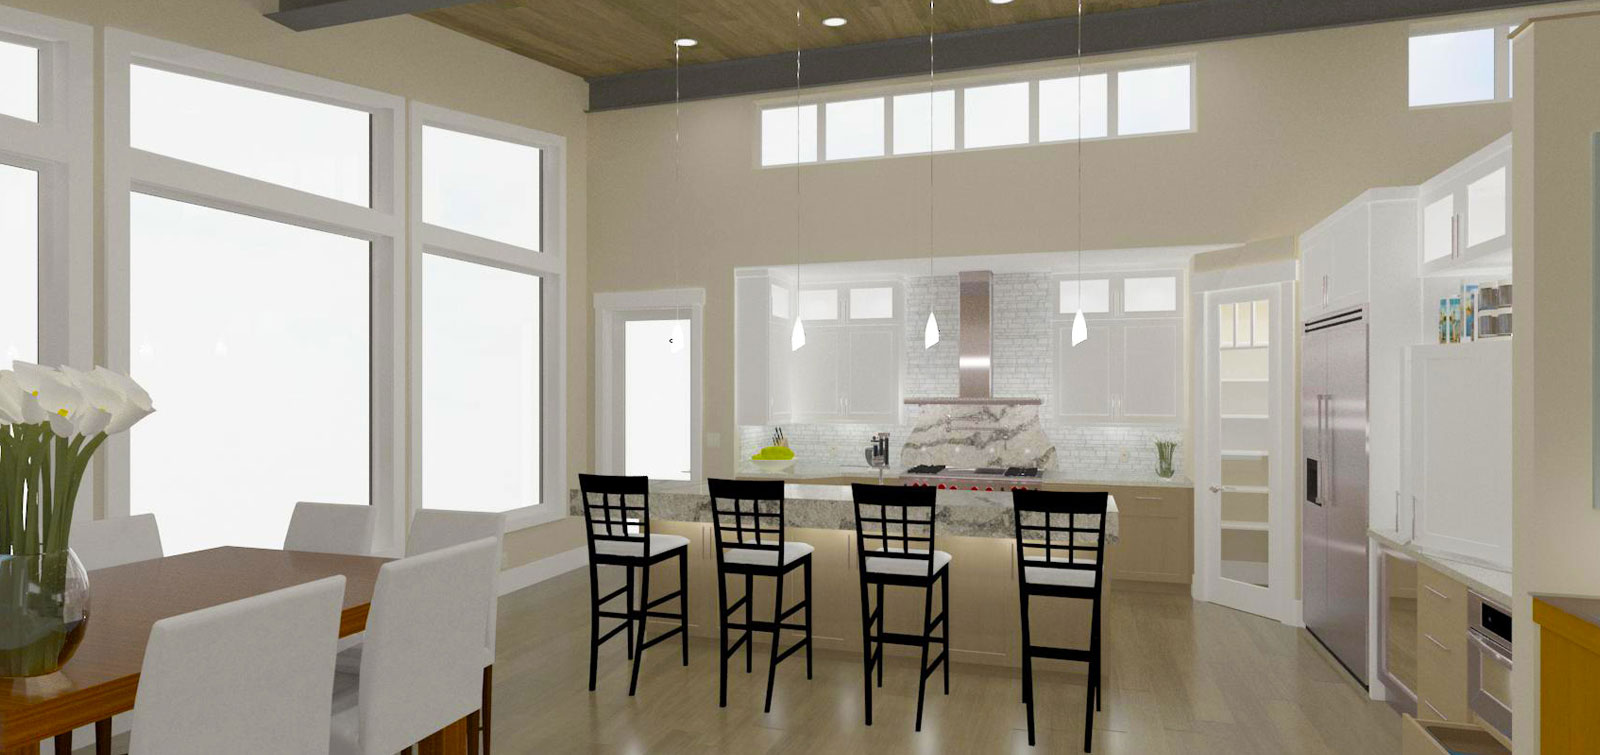 Kitchen Design rendering using line drawing and photorealistic render. Watch time-lapse video for kitchen design